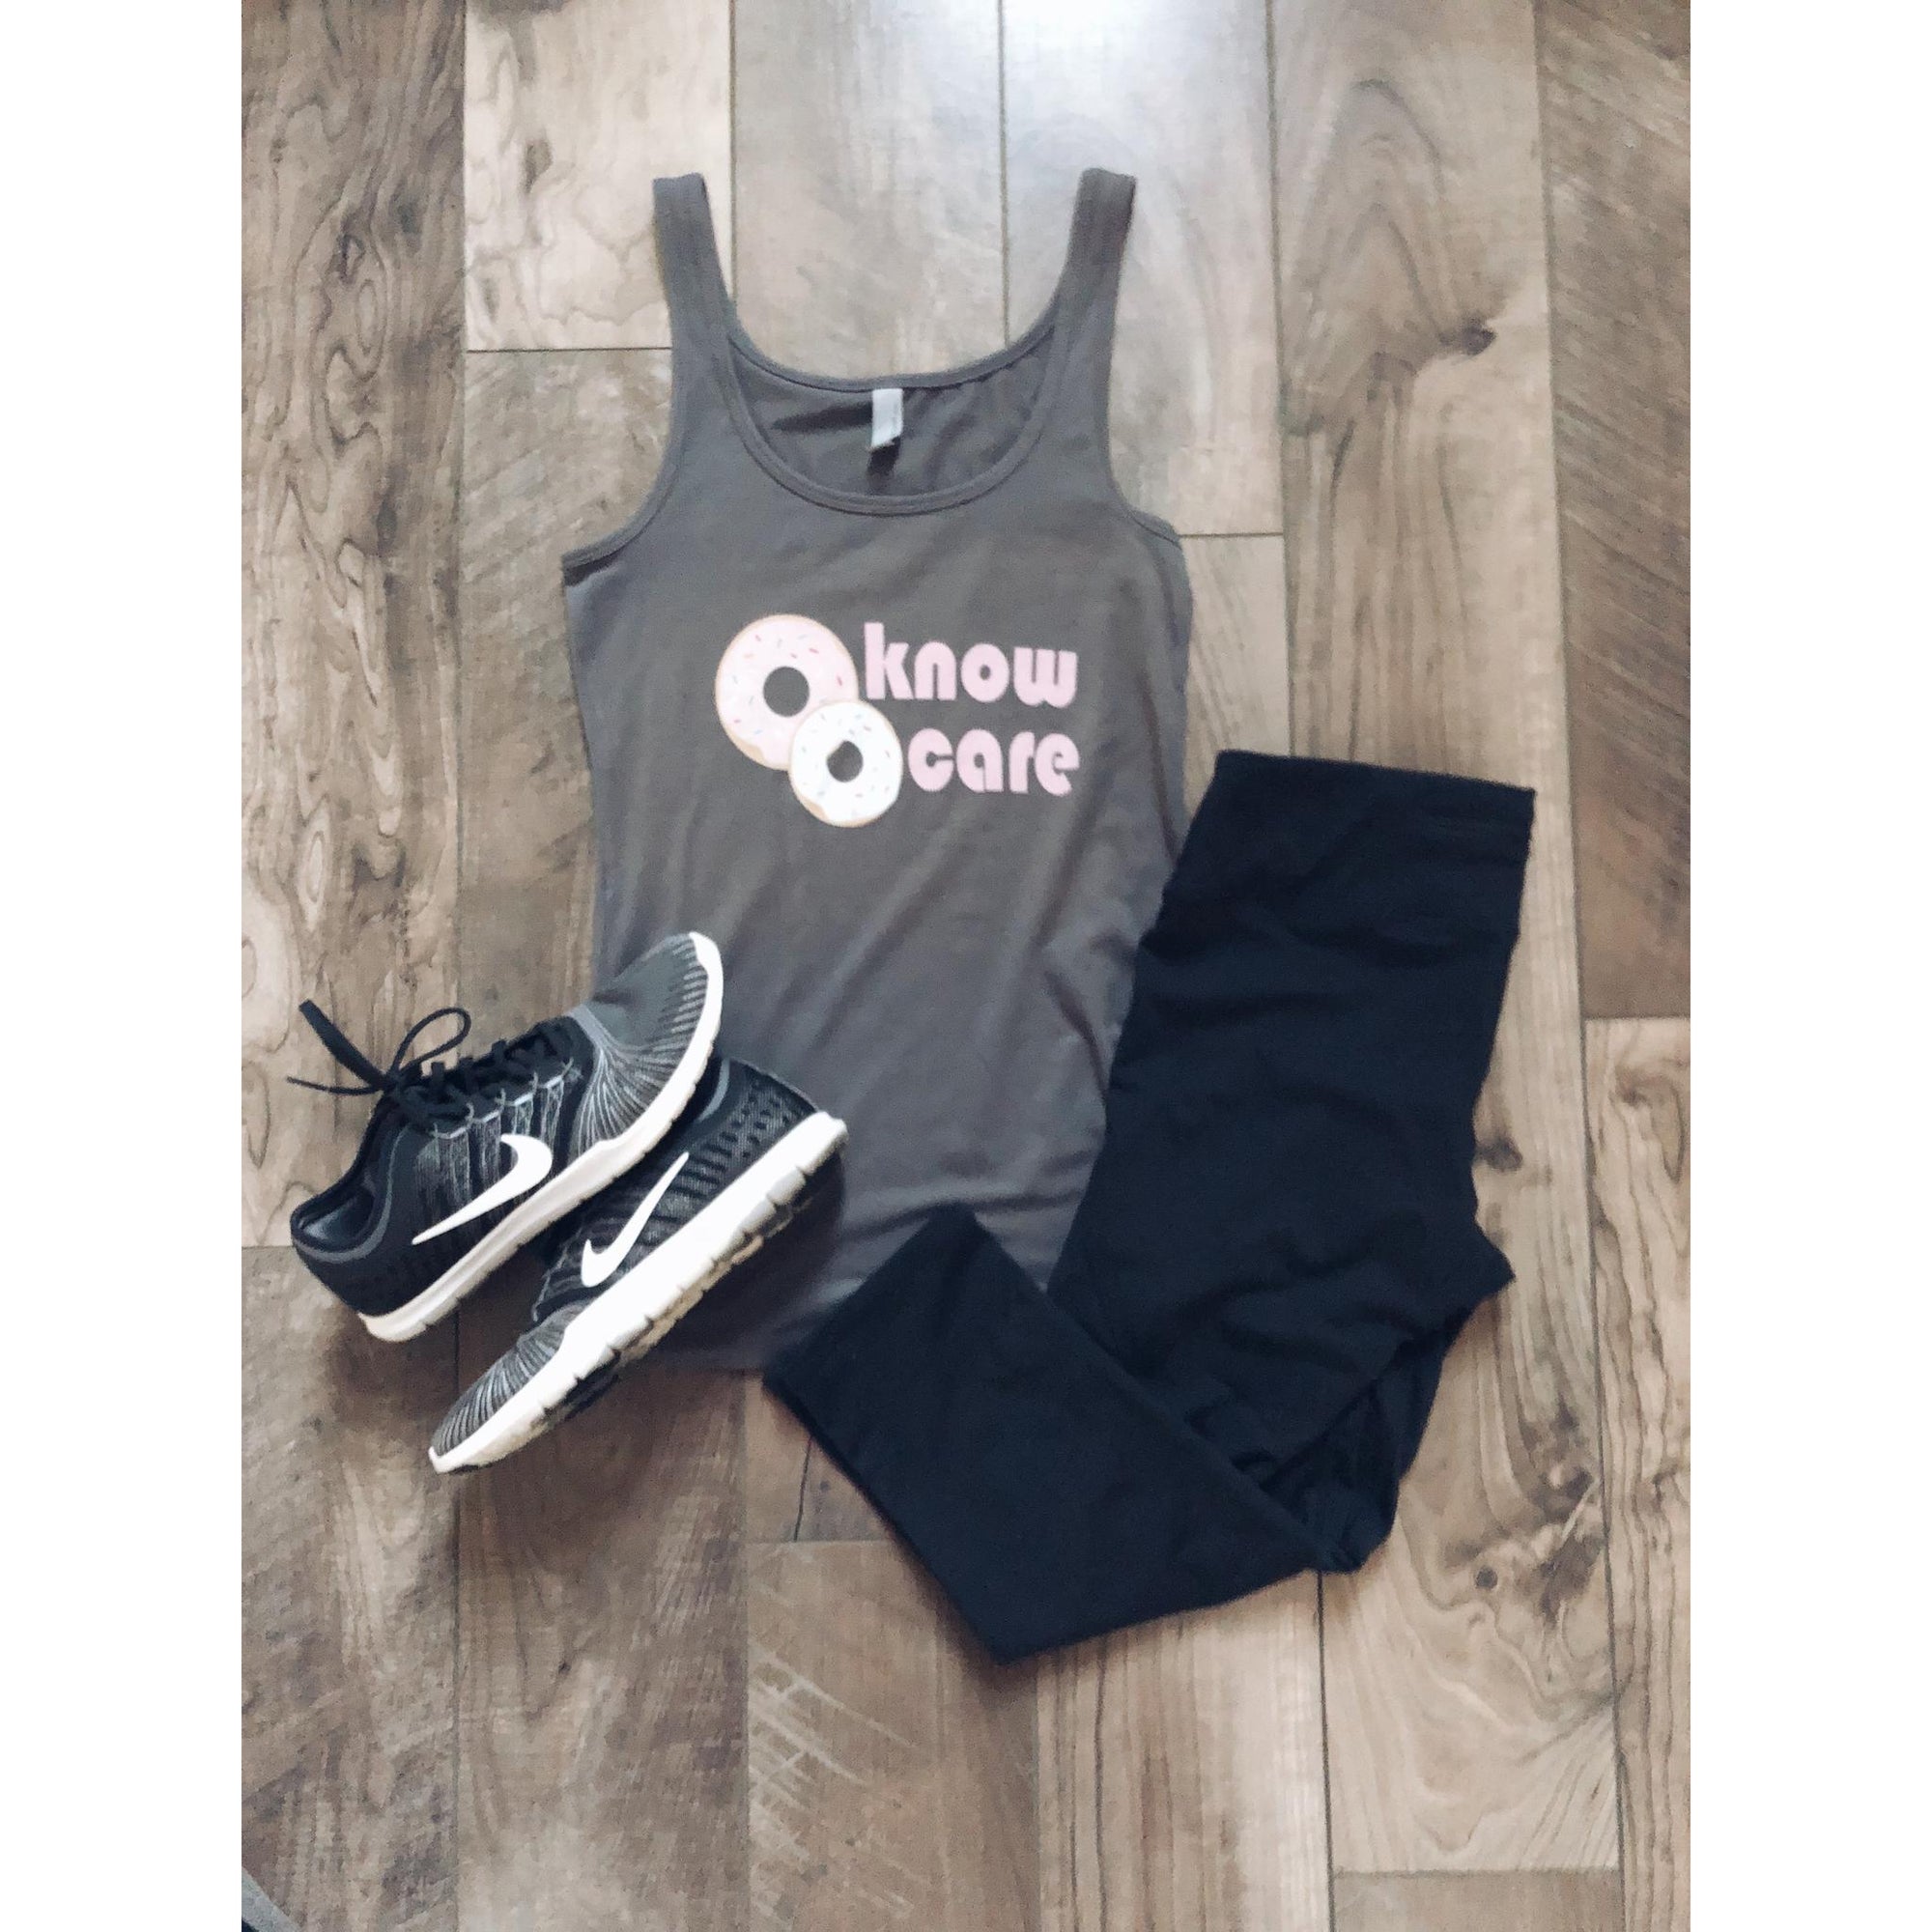 Donut know donut care women’s fitted tank Fitness tank Costa Threads 